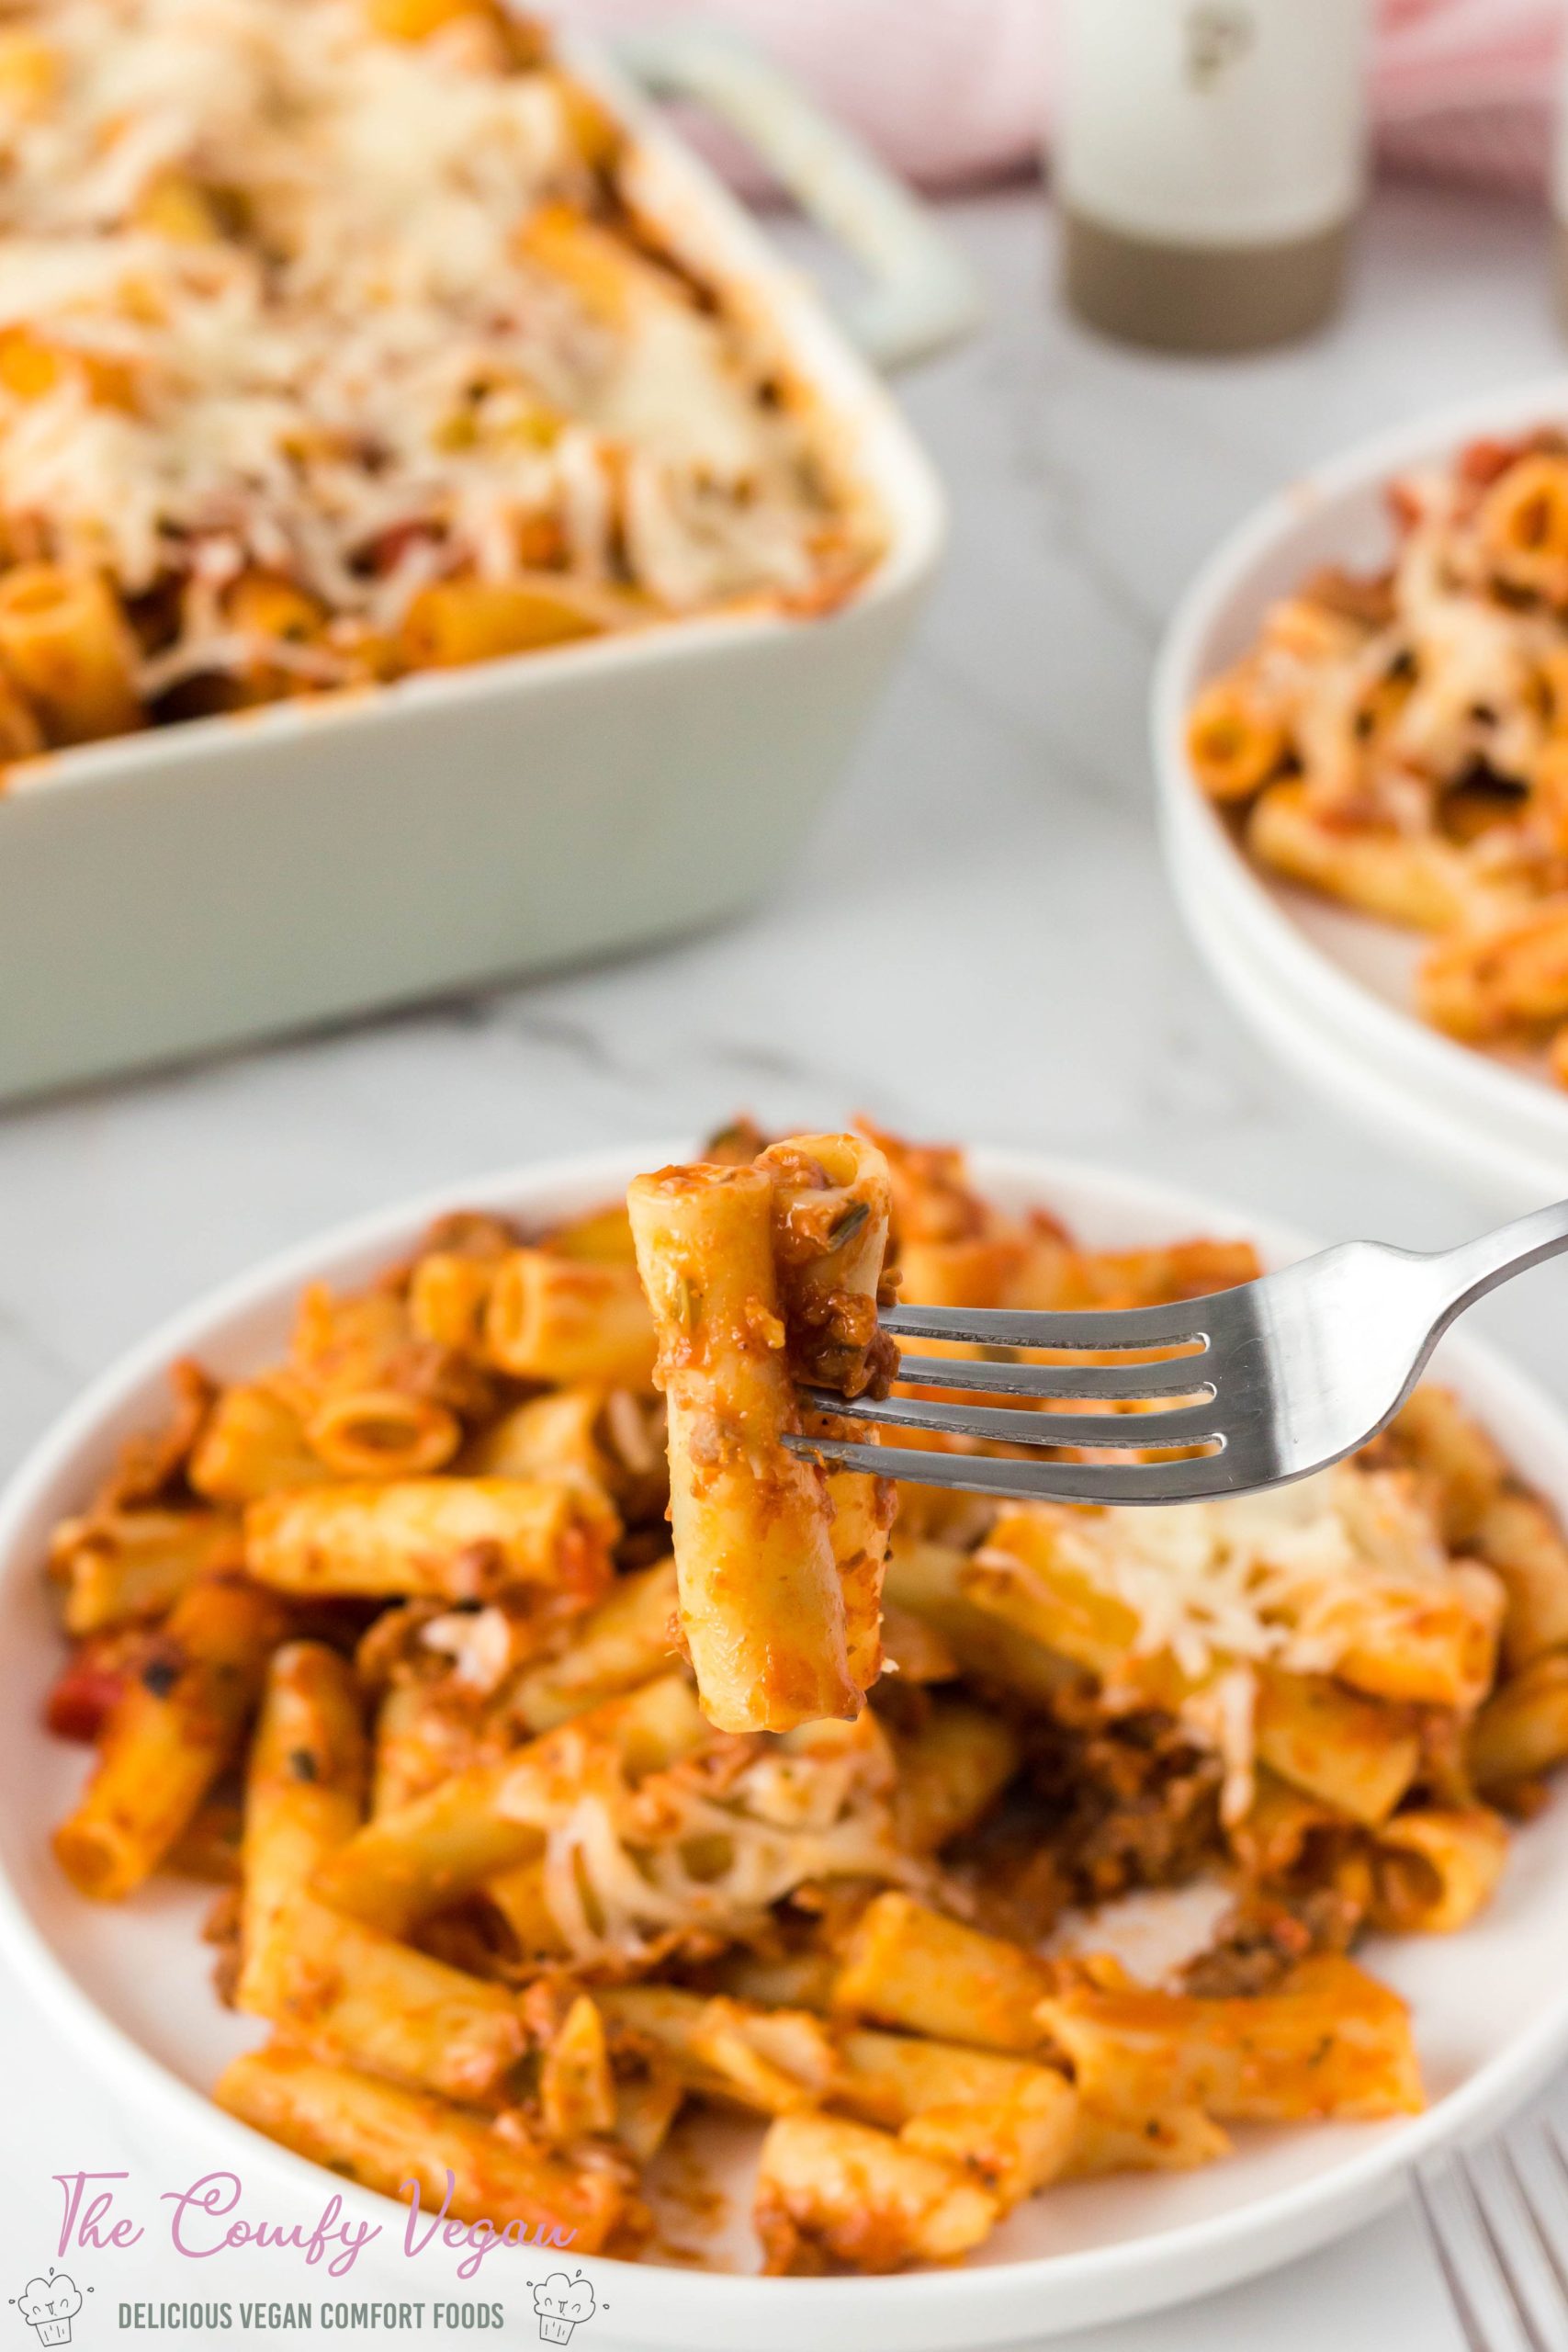 Vegan Baked Ziti is an easy and quick dinner that is ready to enjoy in just 25 minutes. This 6-ingredient pasta dinner recipe is a filling option that the whole family will love. Serve alongside some Vegan Dinner Rolls and Vegan Caesar Salad for a dinner that will feed a crowd.